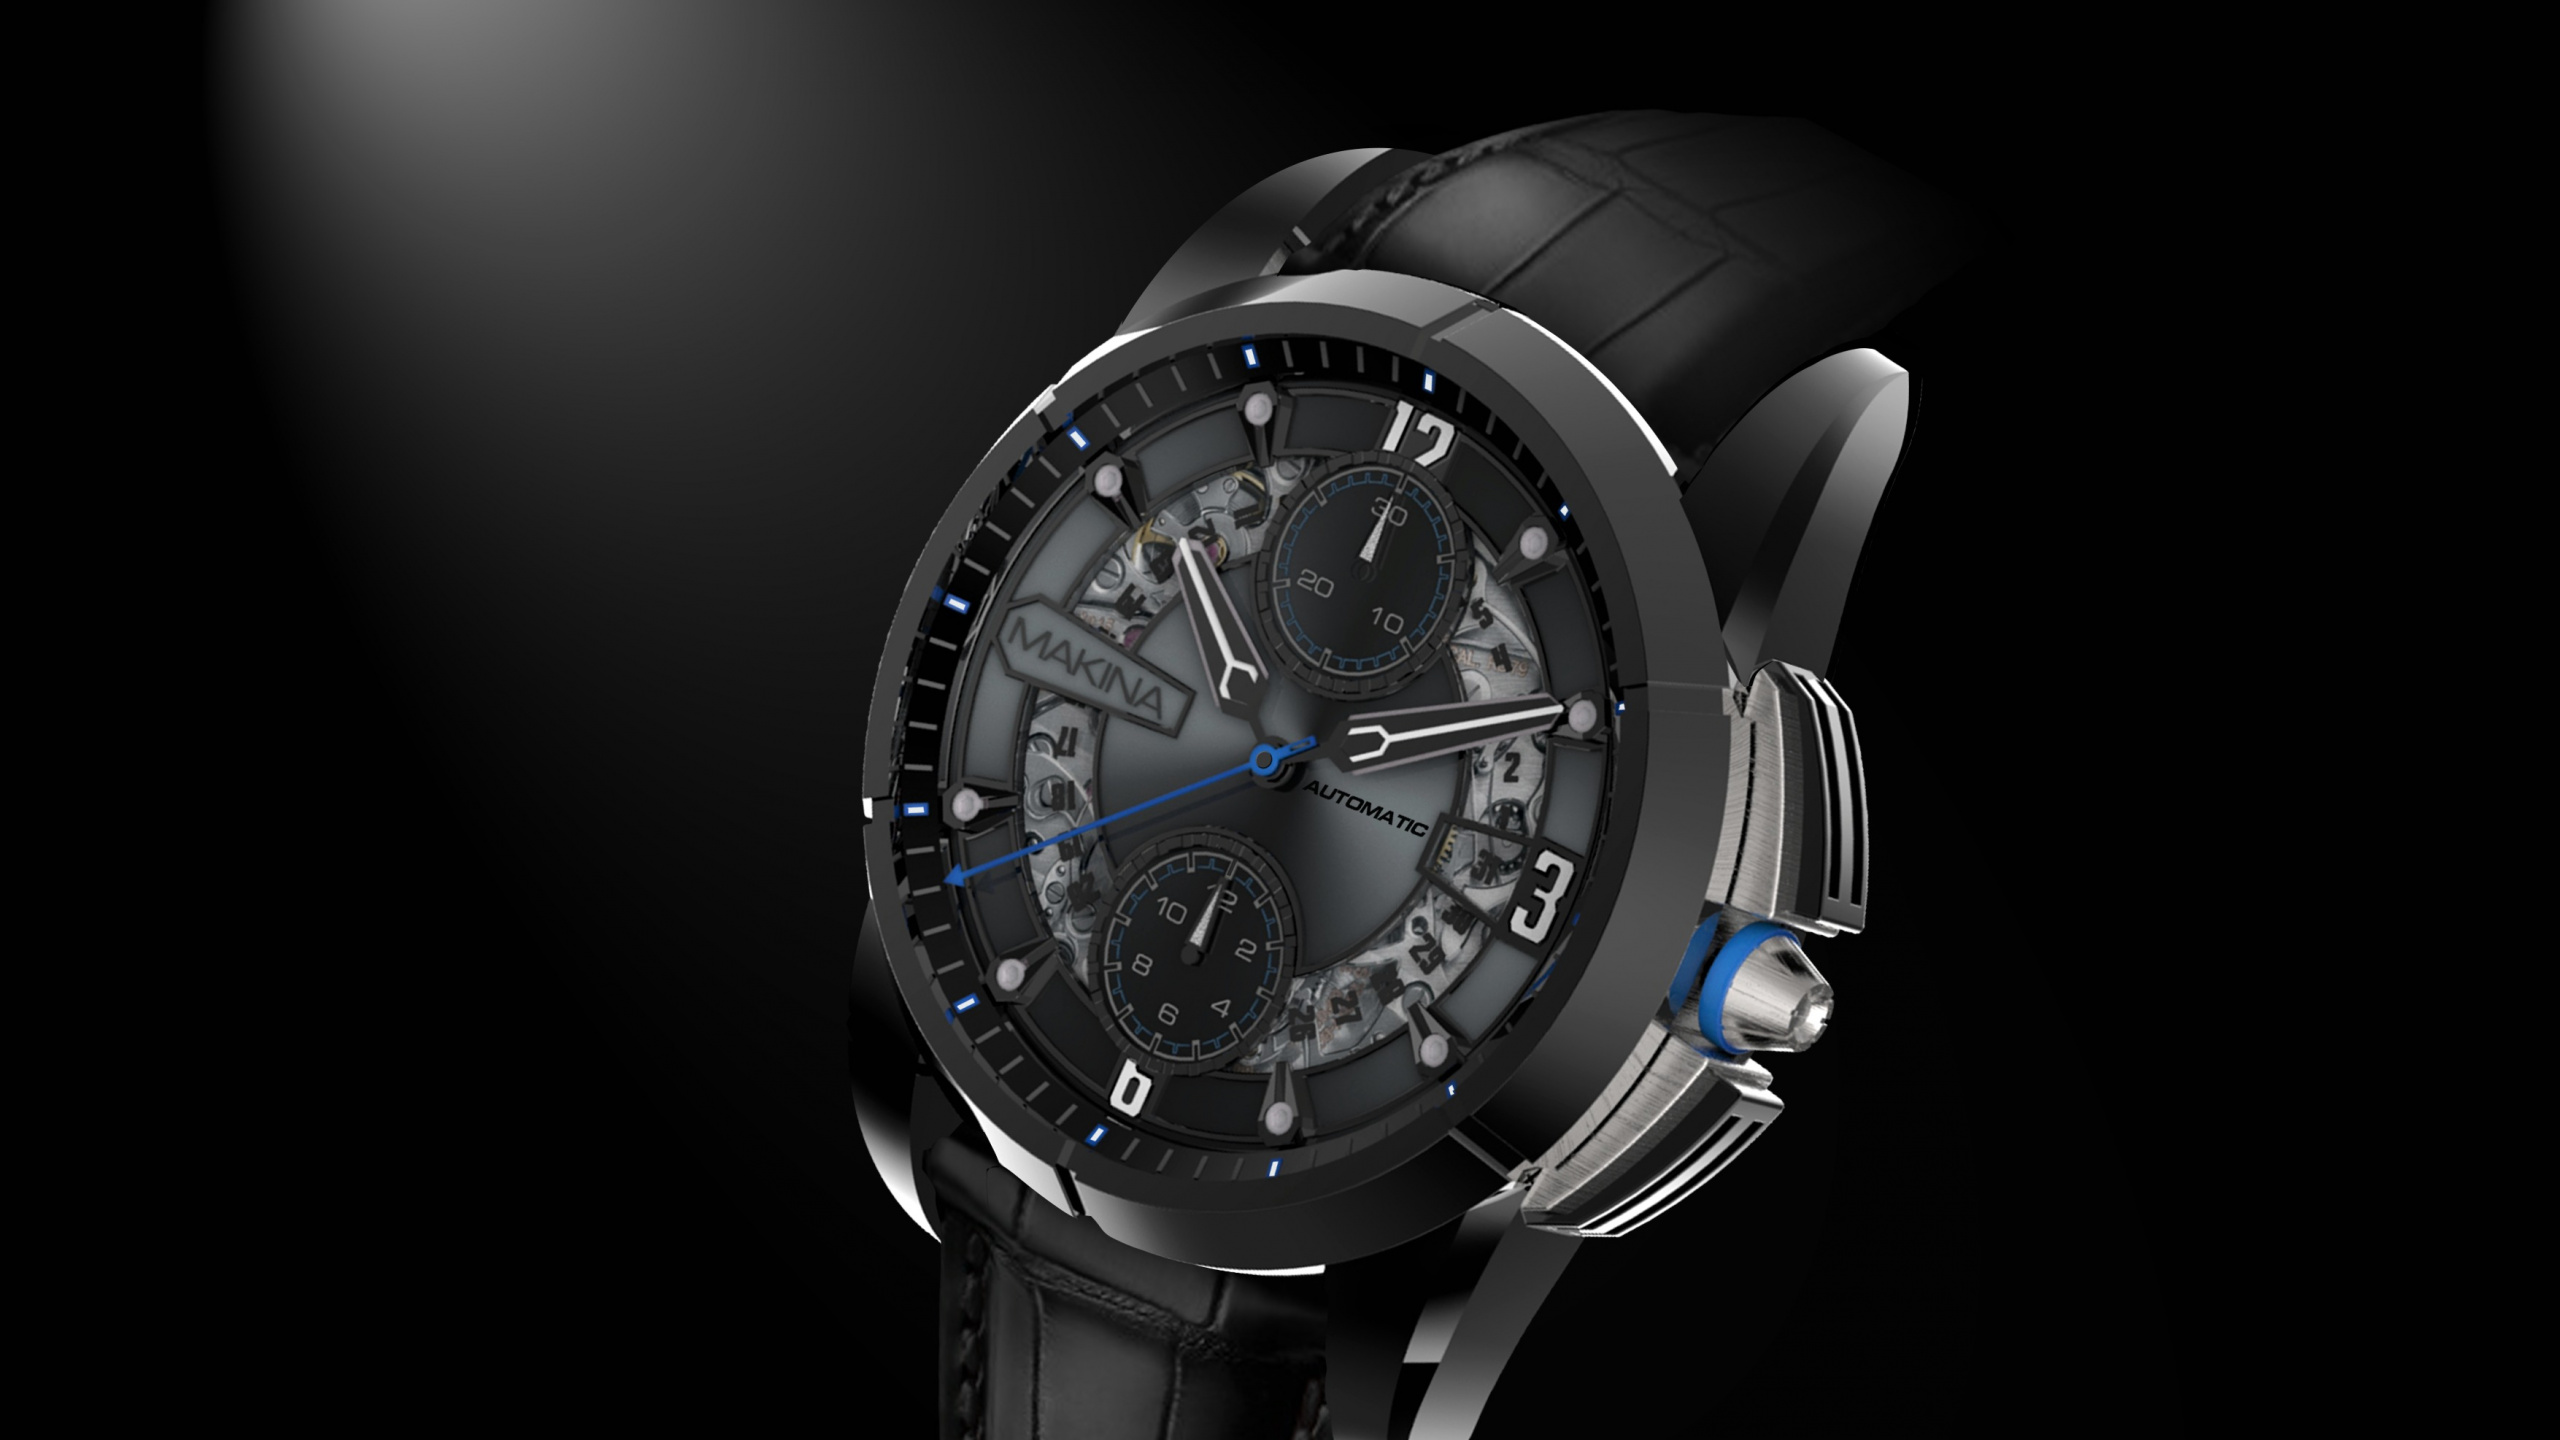 Silver and Blue Chronograph Watch. Wallpaper in 2560x1440 Resolution